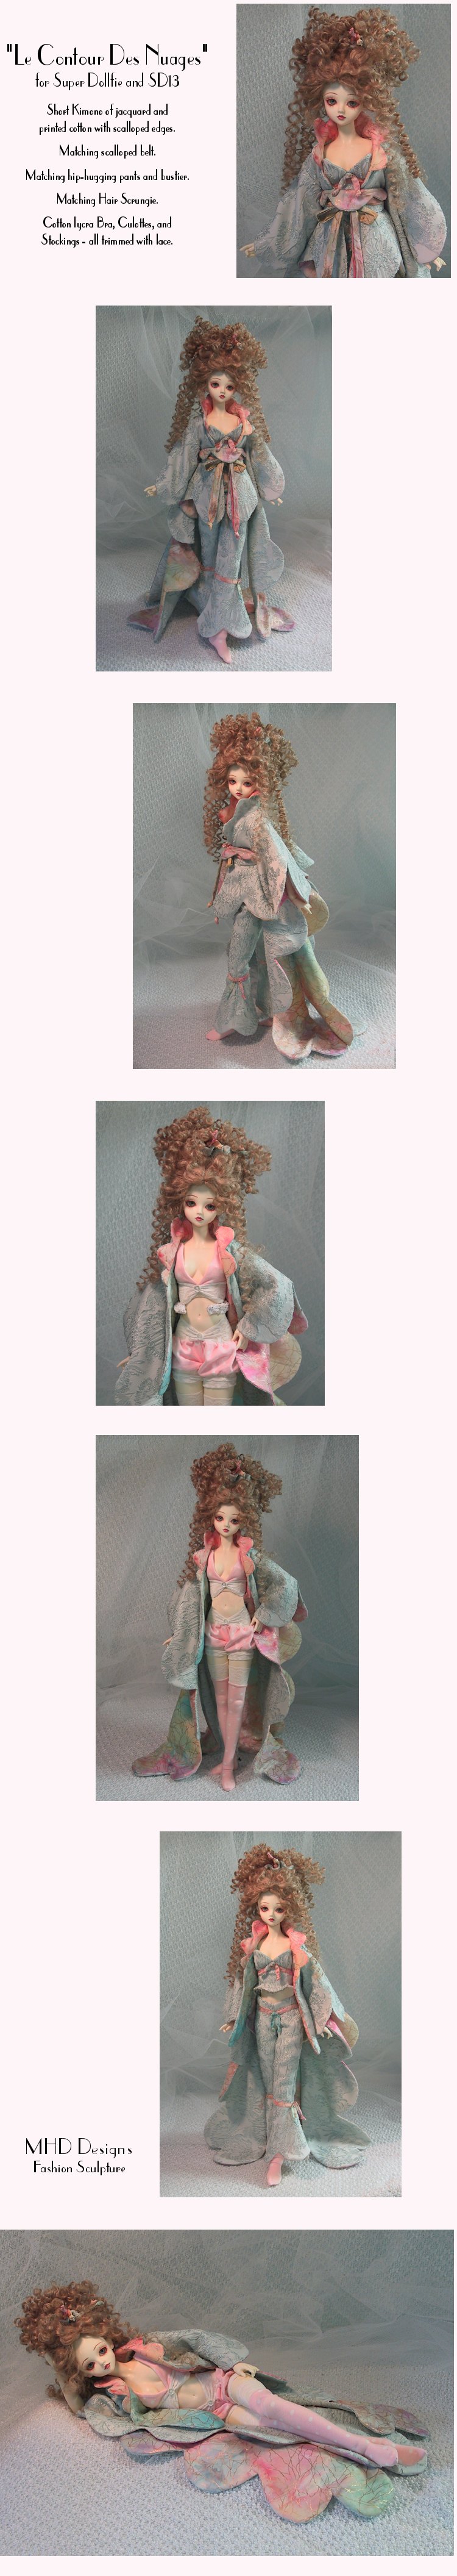 MHD Designs - The Lining of the Clouds  - for Super Dollfie or SD13